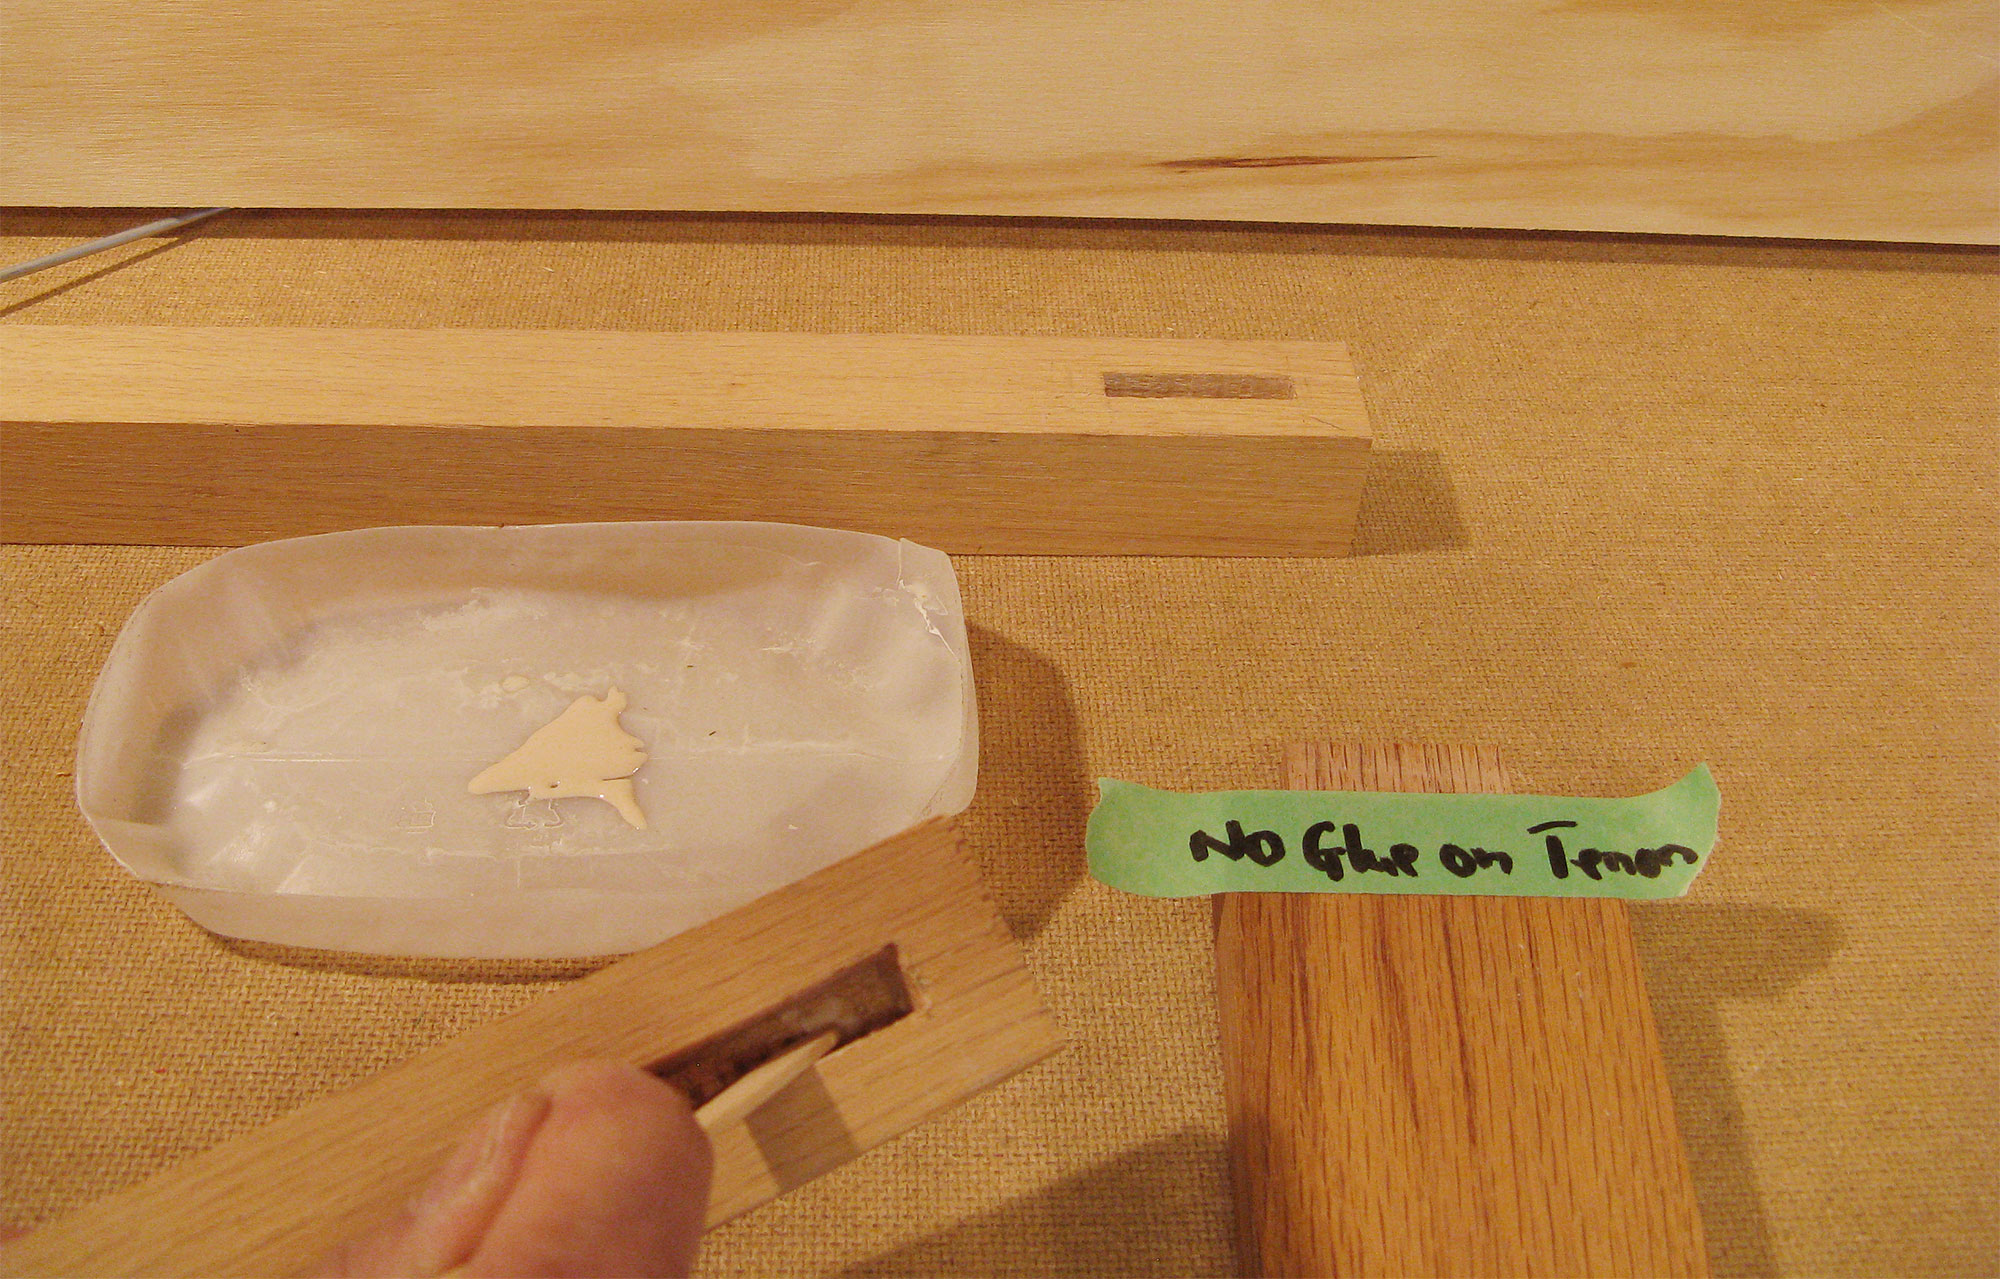 Applying glue to mortise.